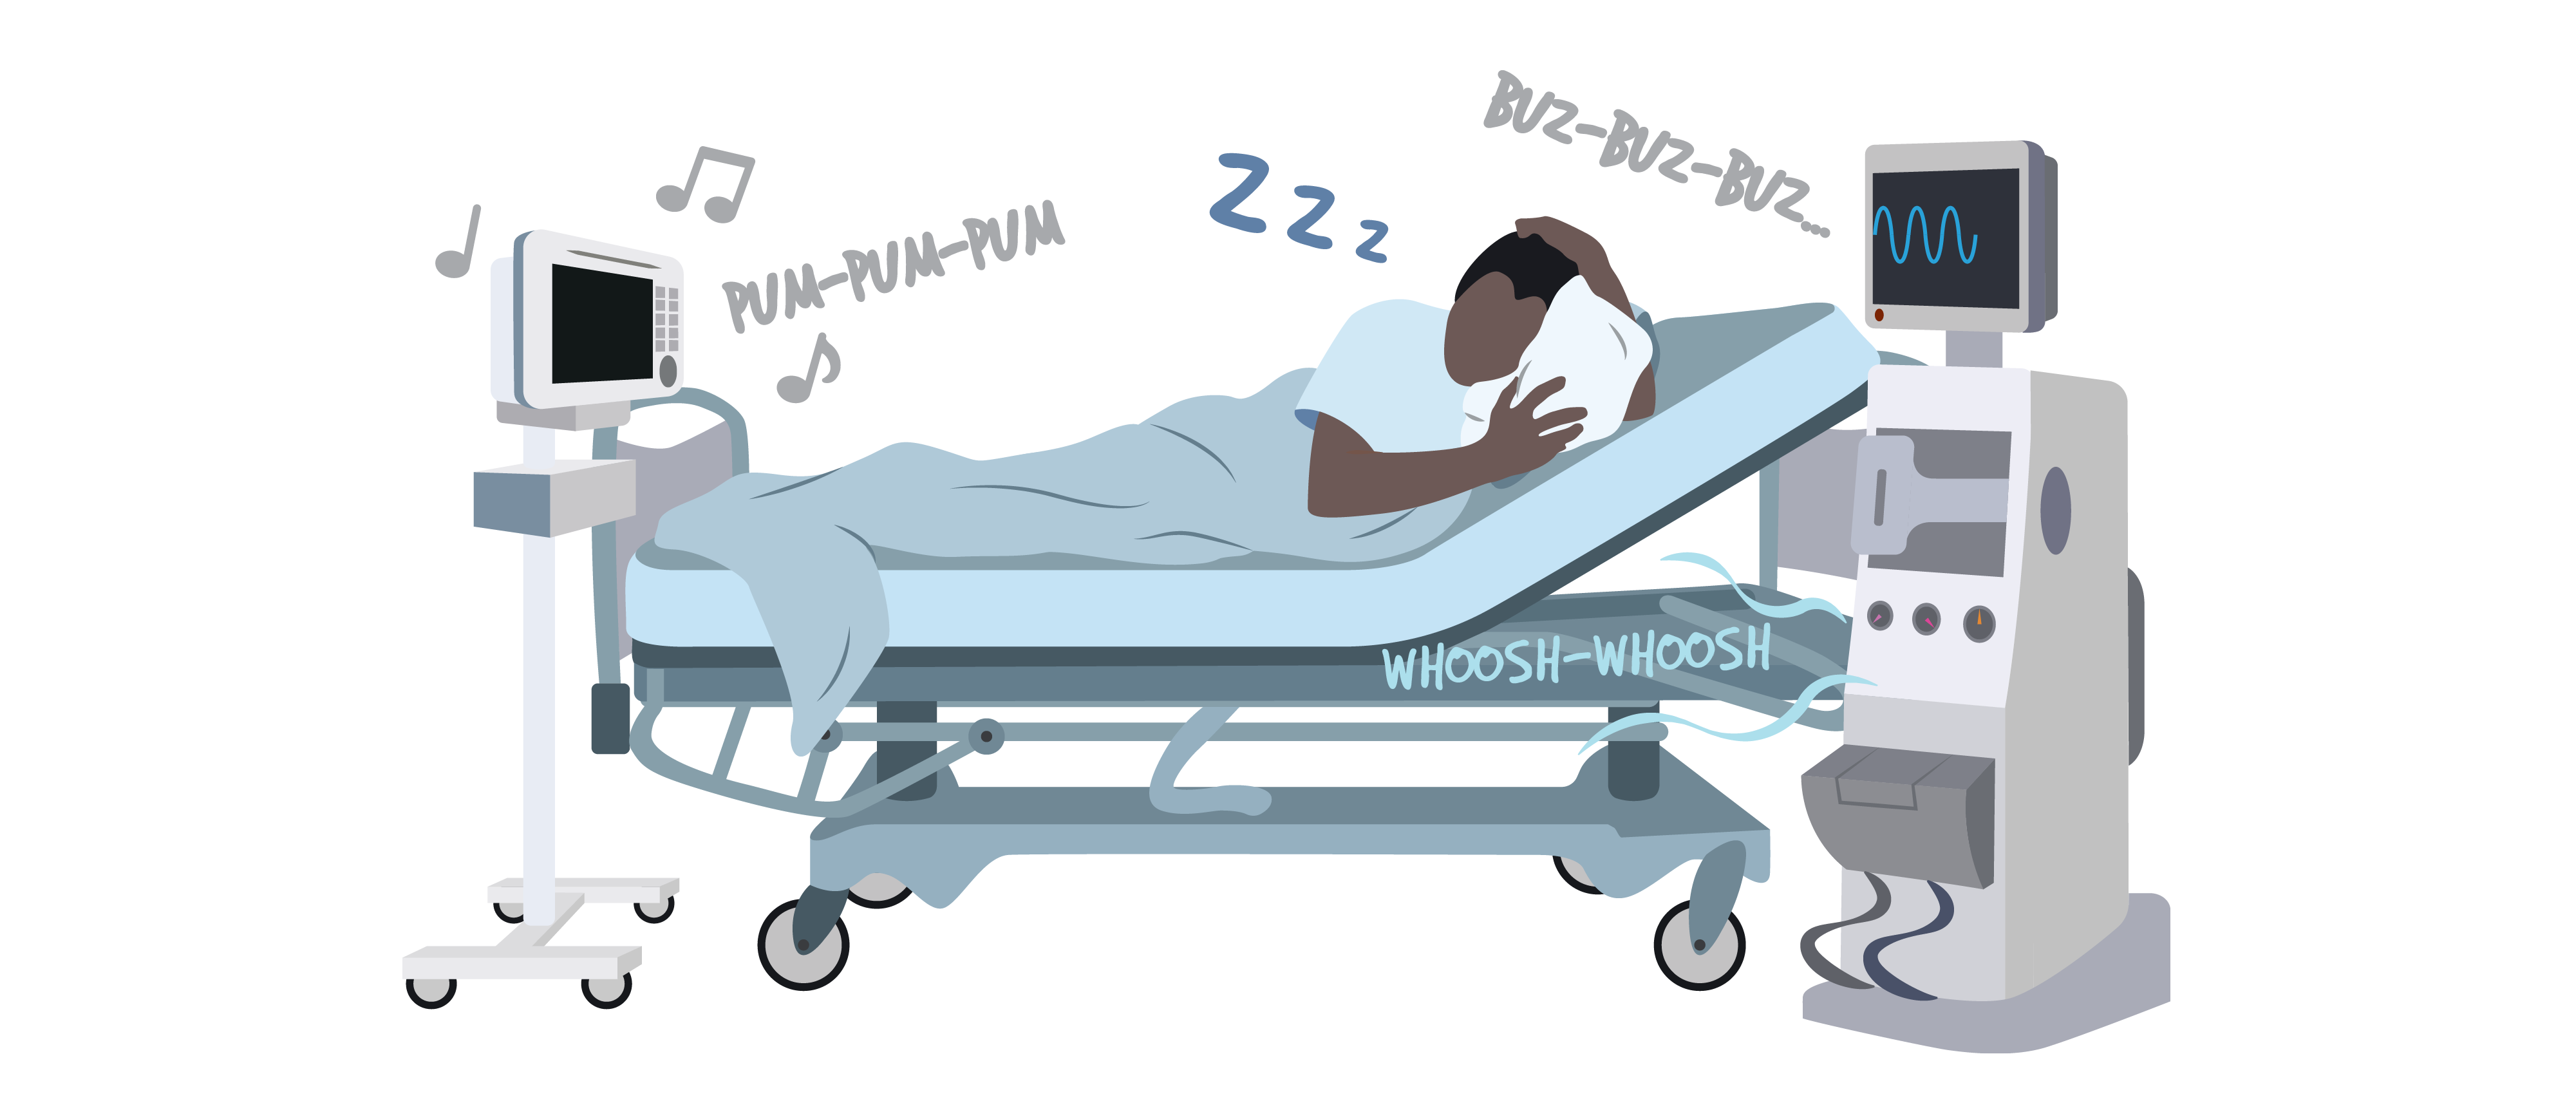 Man sleeping in medical bed with ZZZ written above head. Computer and medical equipment on either side of bed with PUM-PUM, BUZ-BUZ and WHOOSH written in grey and blue and grey musical notes coming out from equipment.